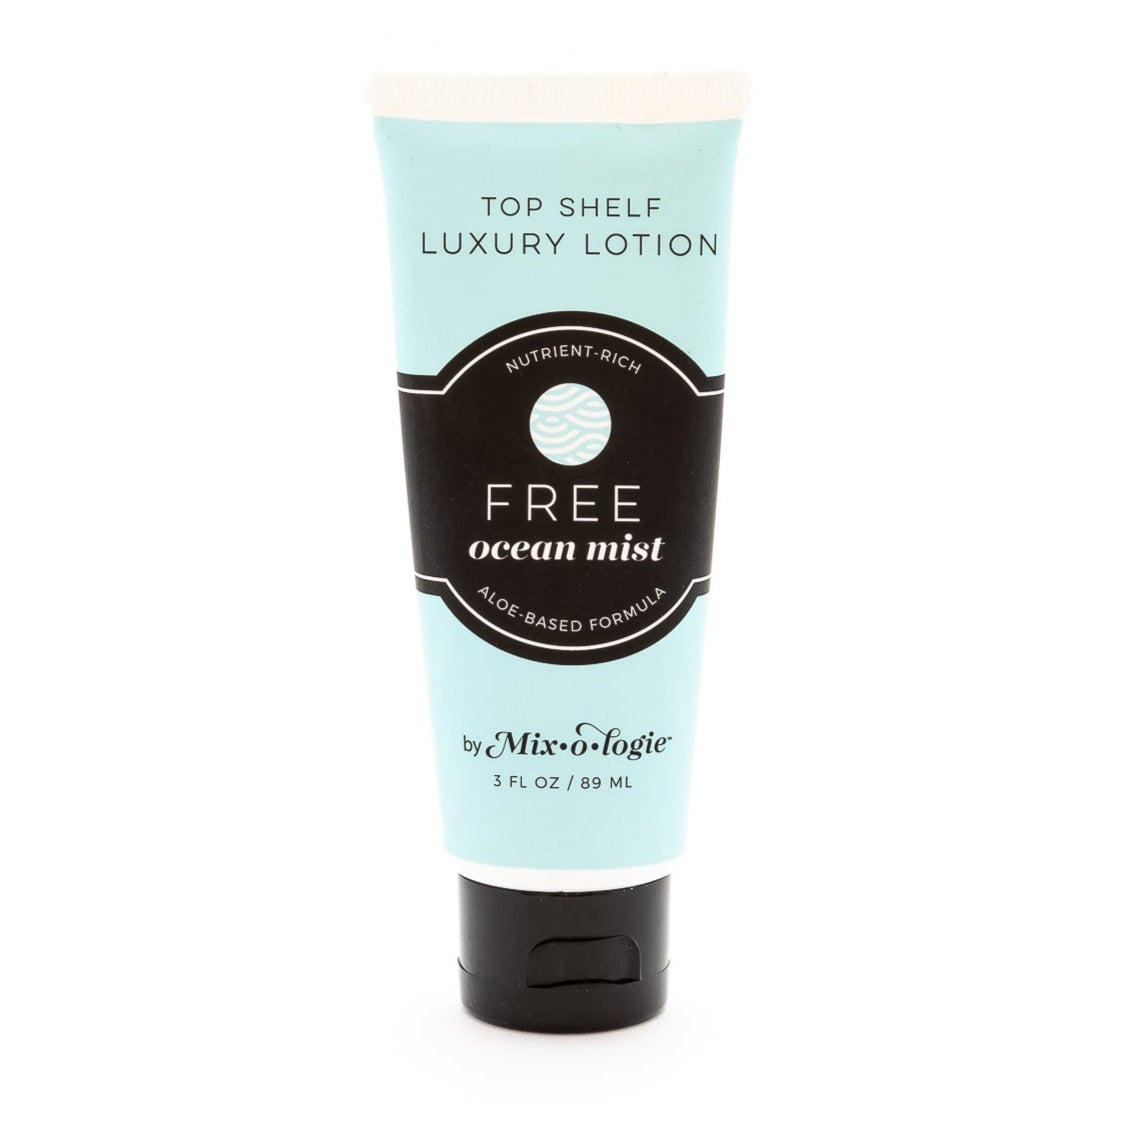 Free (Ocean Mist) Top Shelf Lotion in pale blue tube with black lid and label. Nutrient rich, aloe-based formula, tube has 5 fl oz or 89 mL. Pictured with white background.